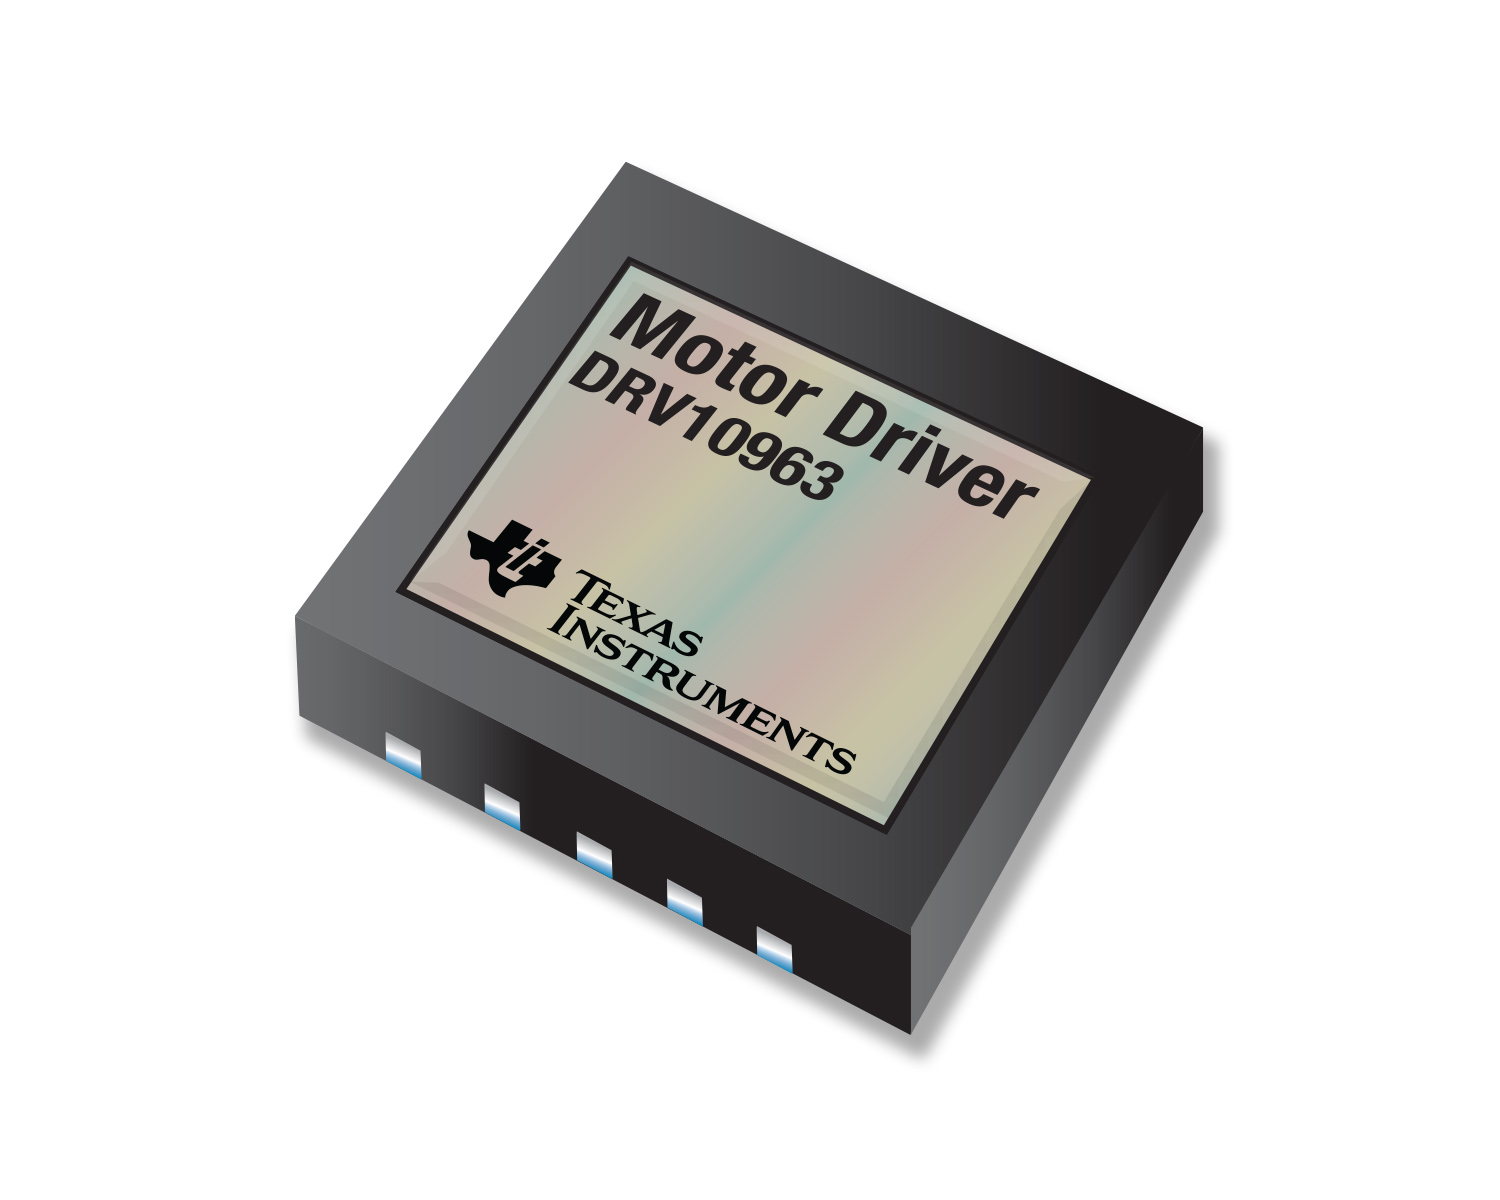 TI introduces sensorless, brushless DC motor driver to spin motors instantly